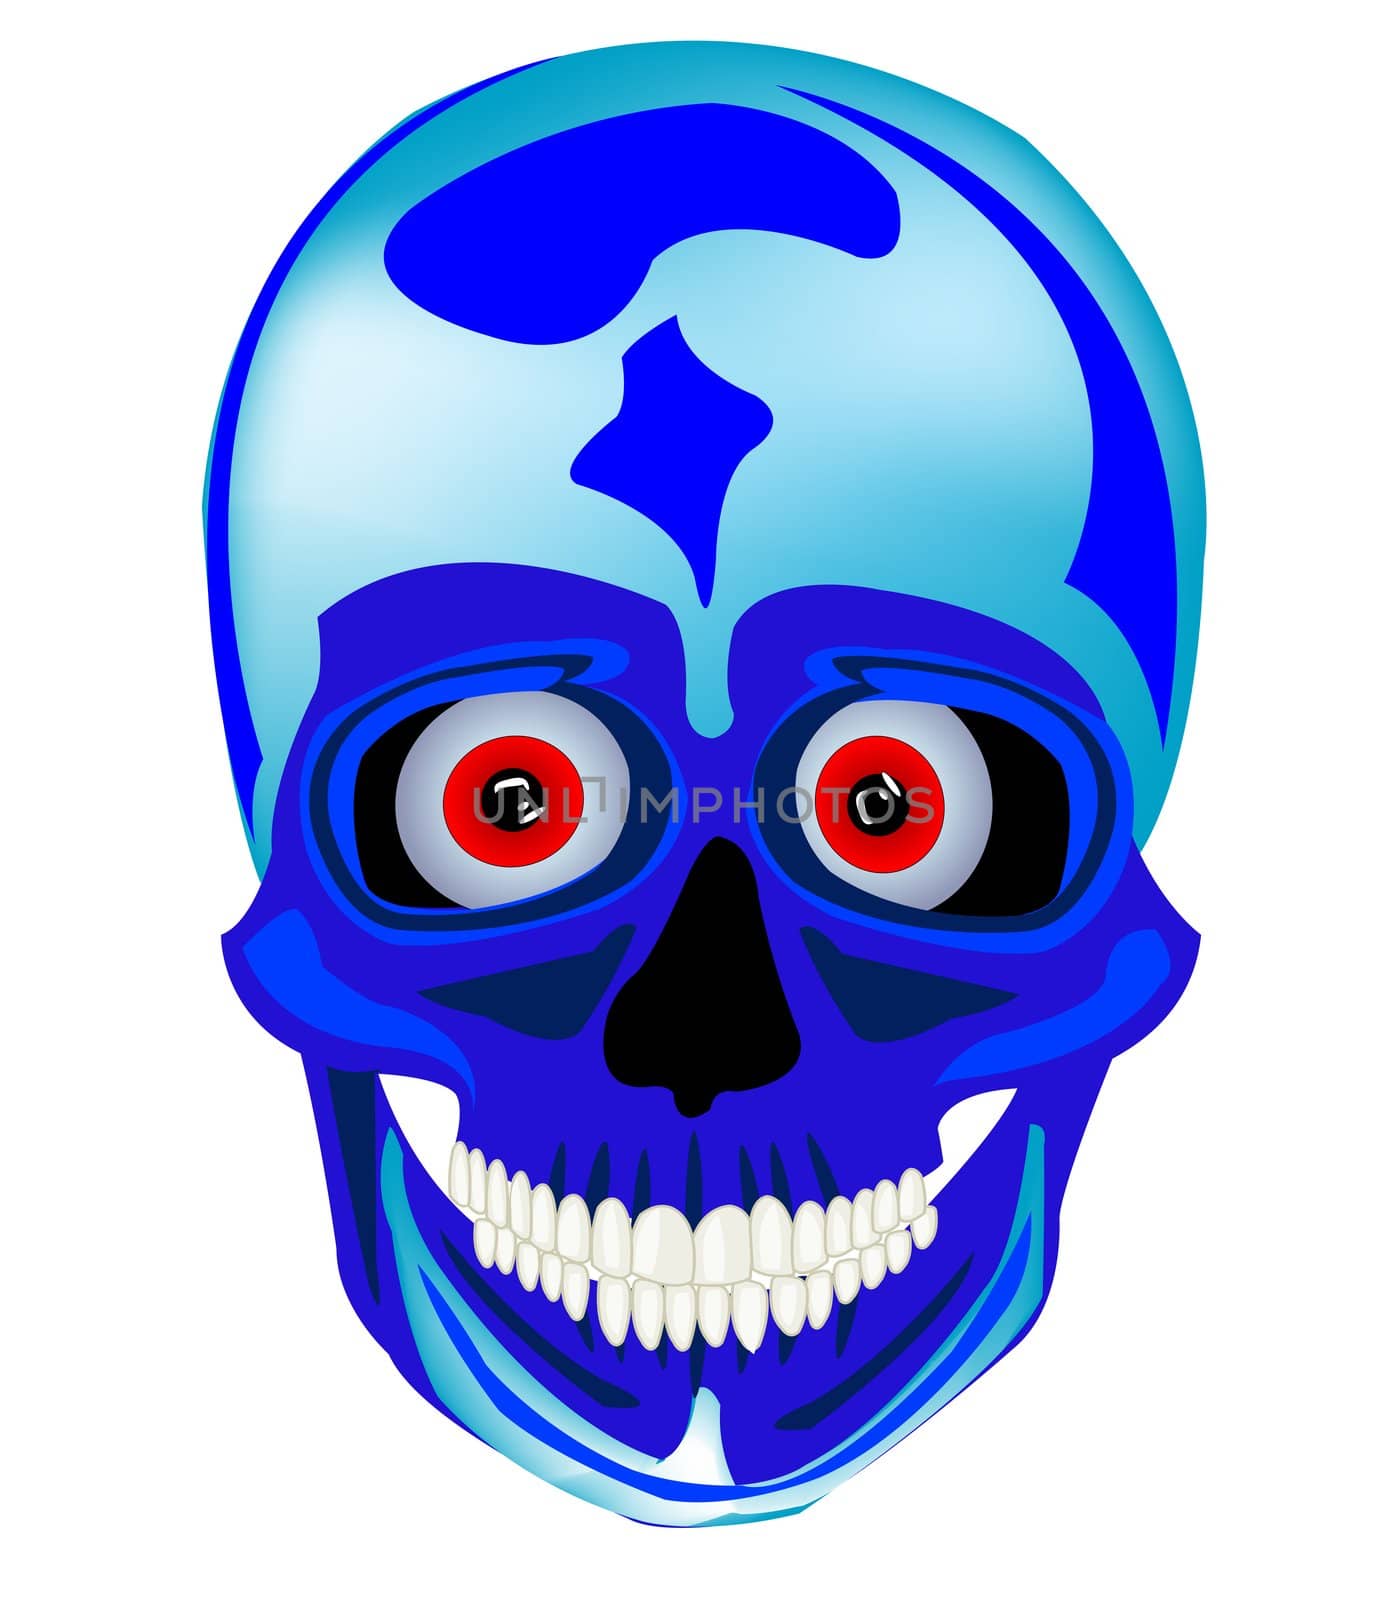 Cartoon skull of the person by cobol1964